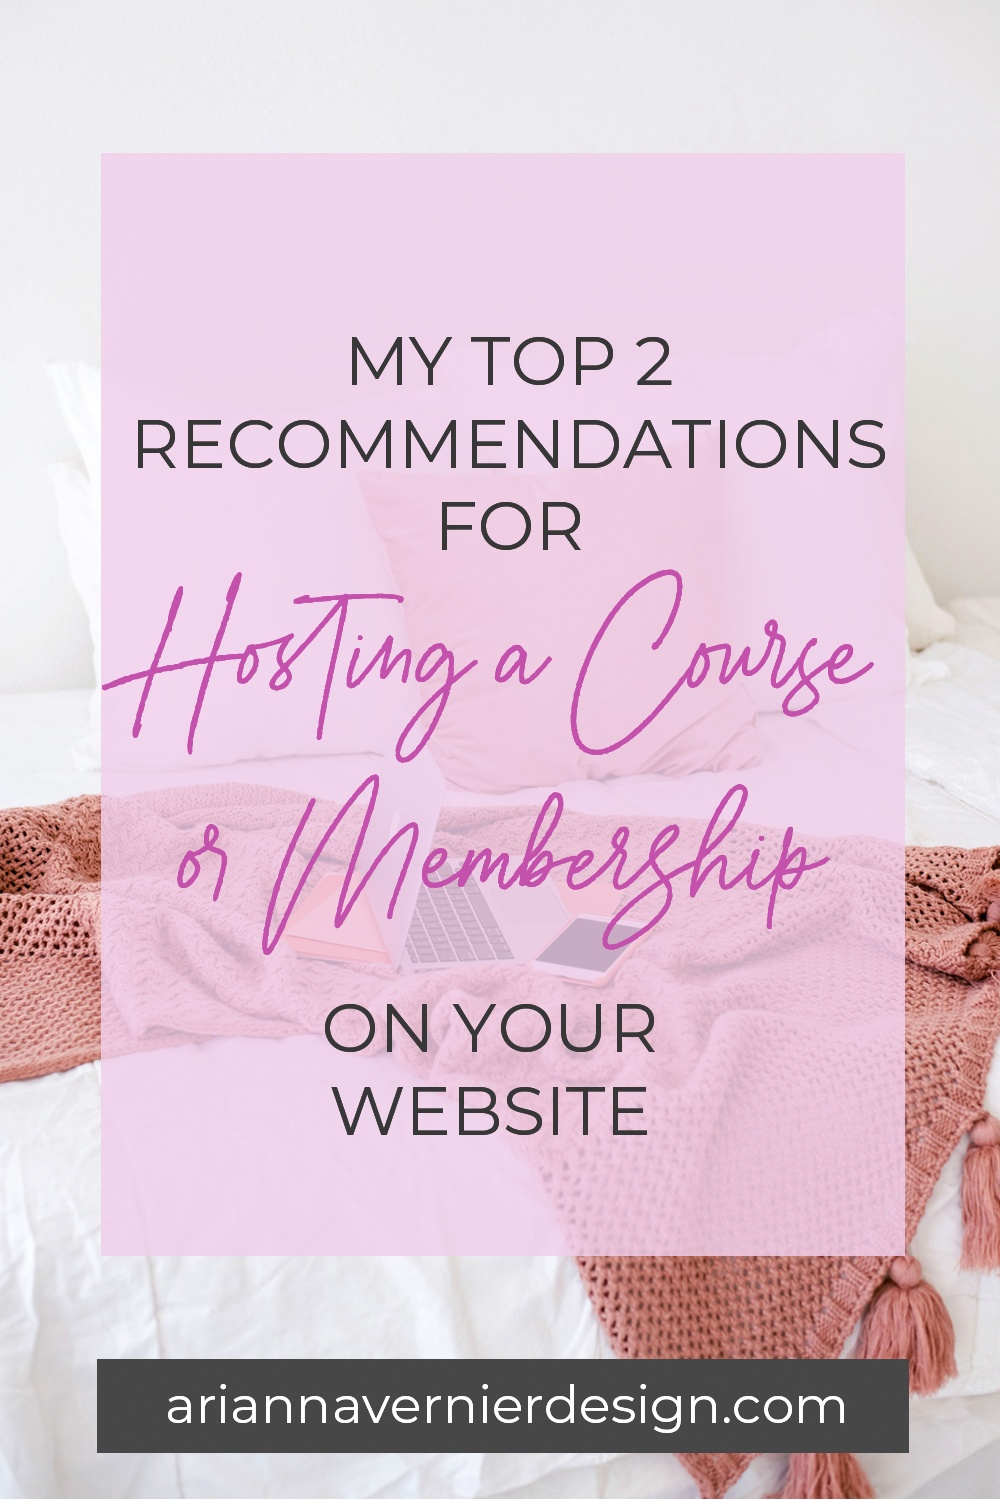 Pinterest pin with a laptop on a bed in the background, with a light purple rectangle over top, and the title "My Top 2 Recommendations for Hosting a Course or Membership on Your Website"